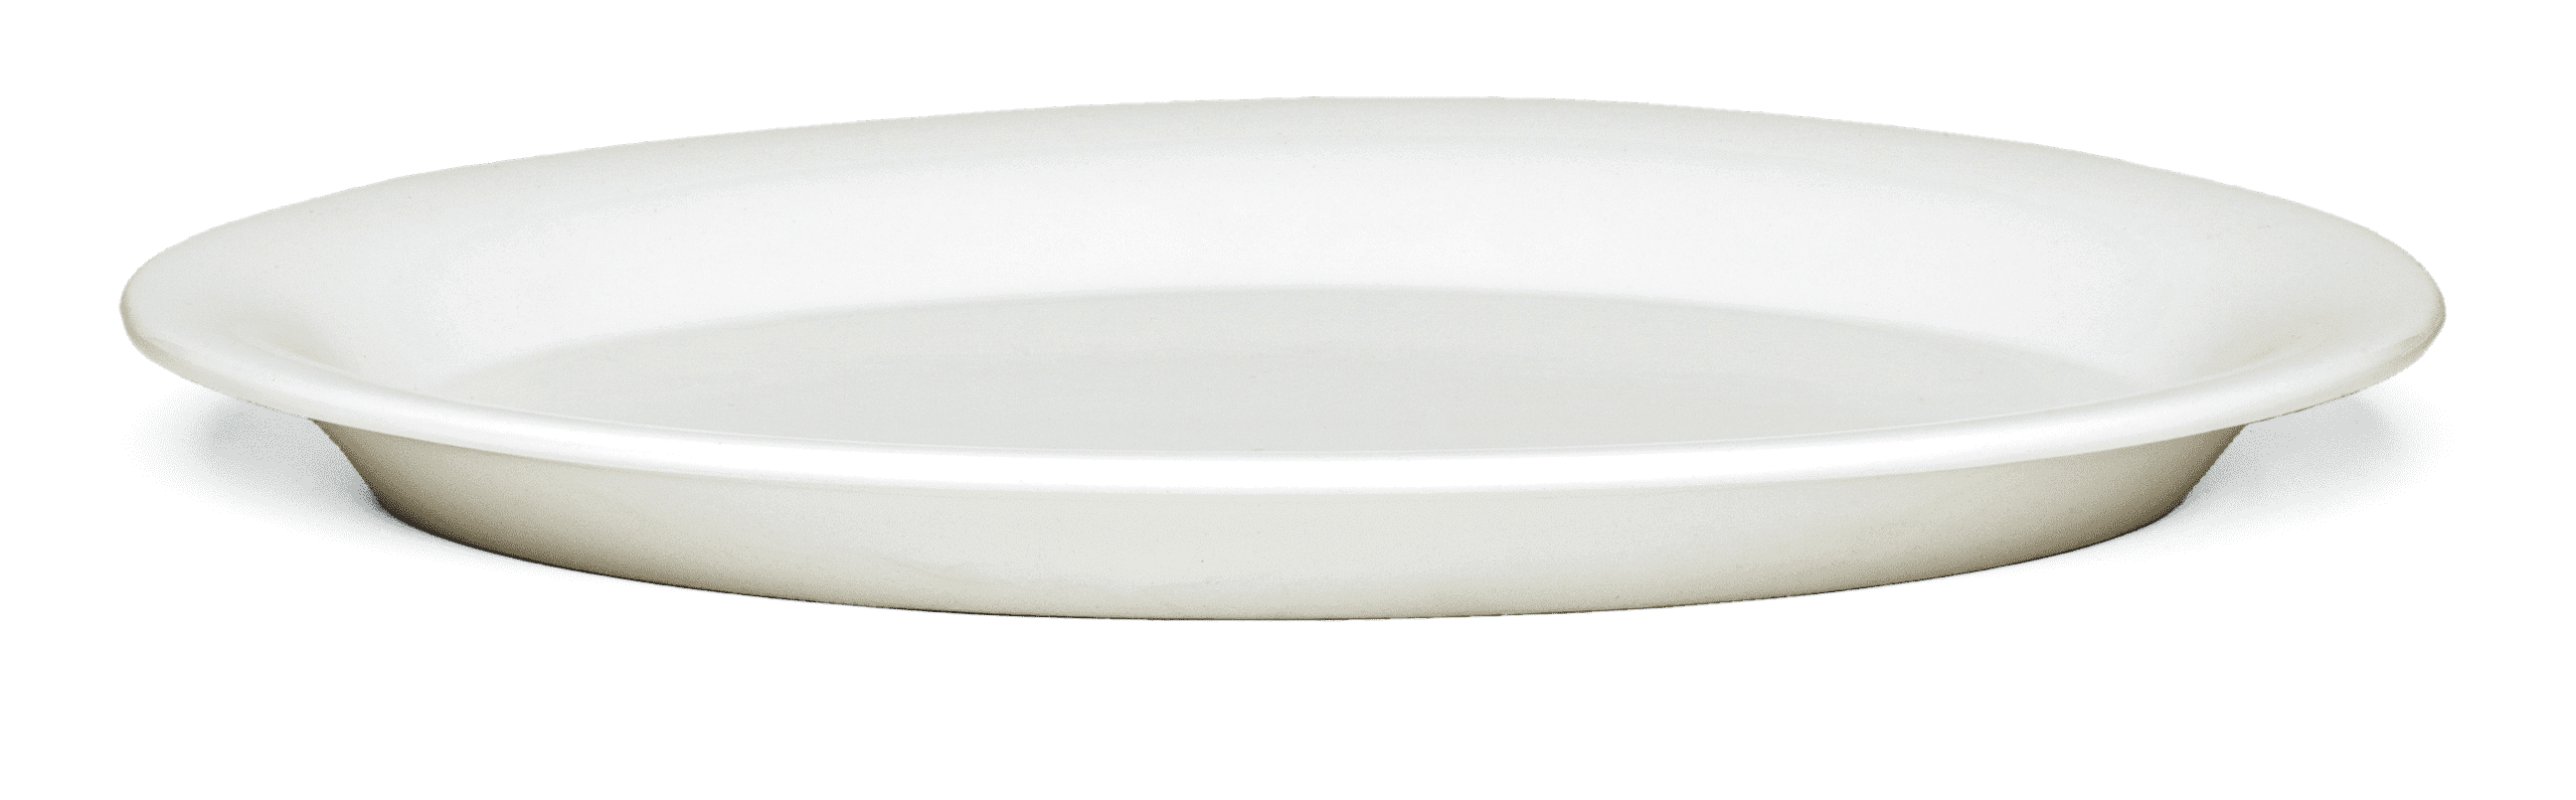 Oval plate 33x22 cm